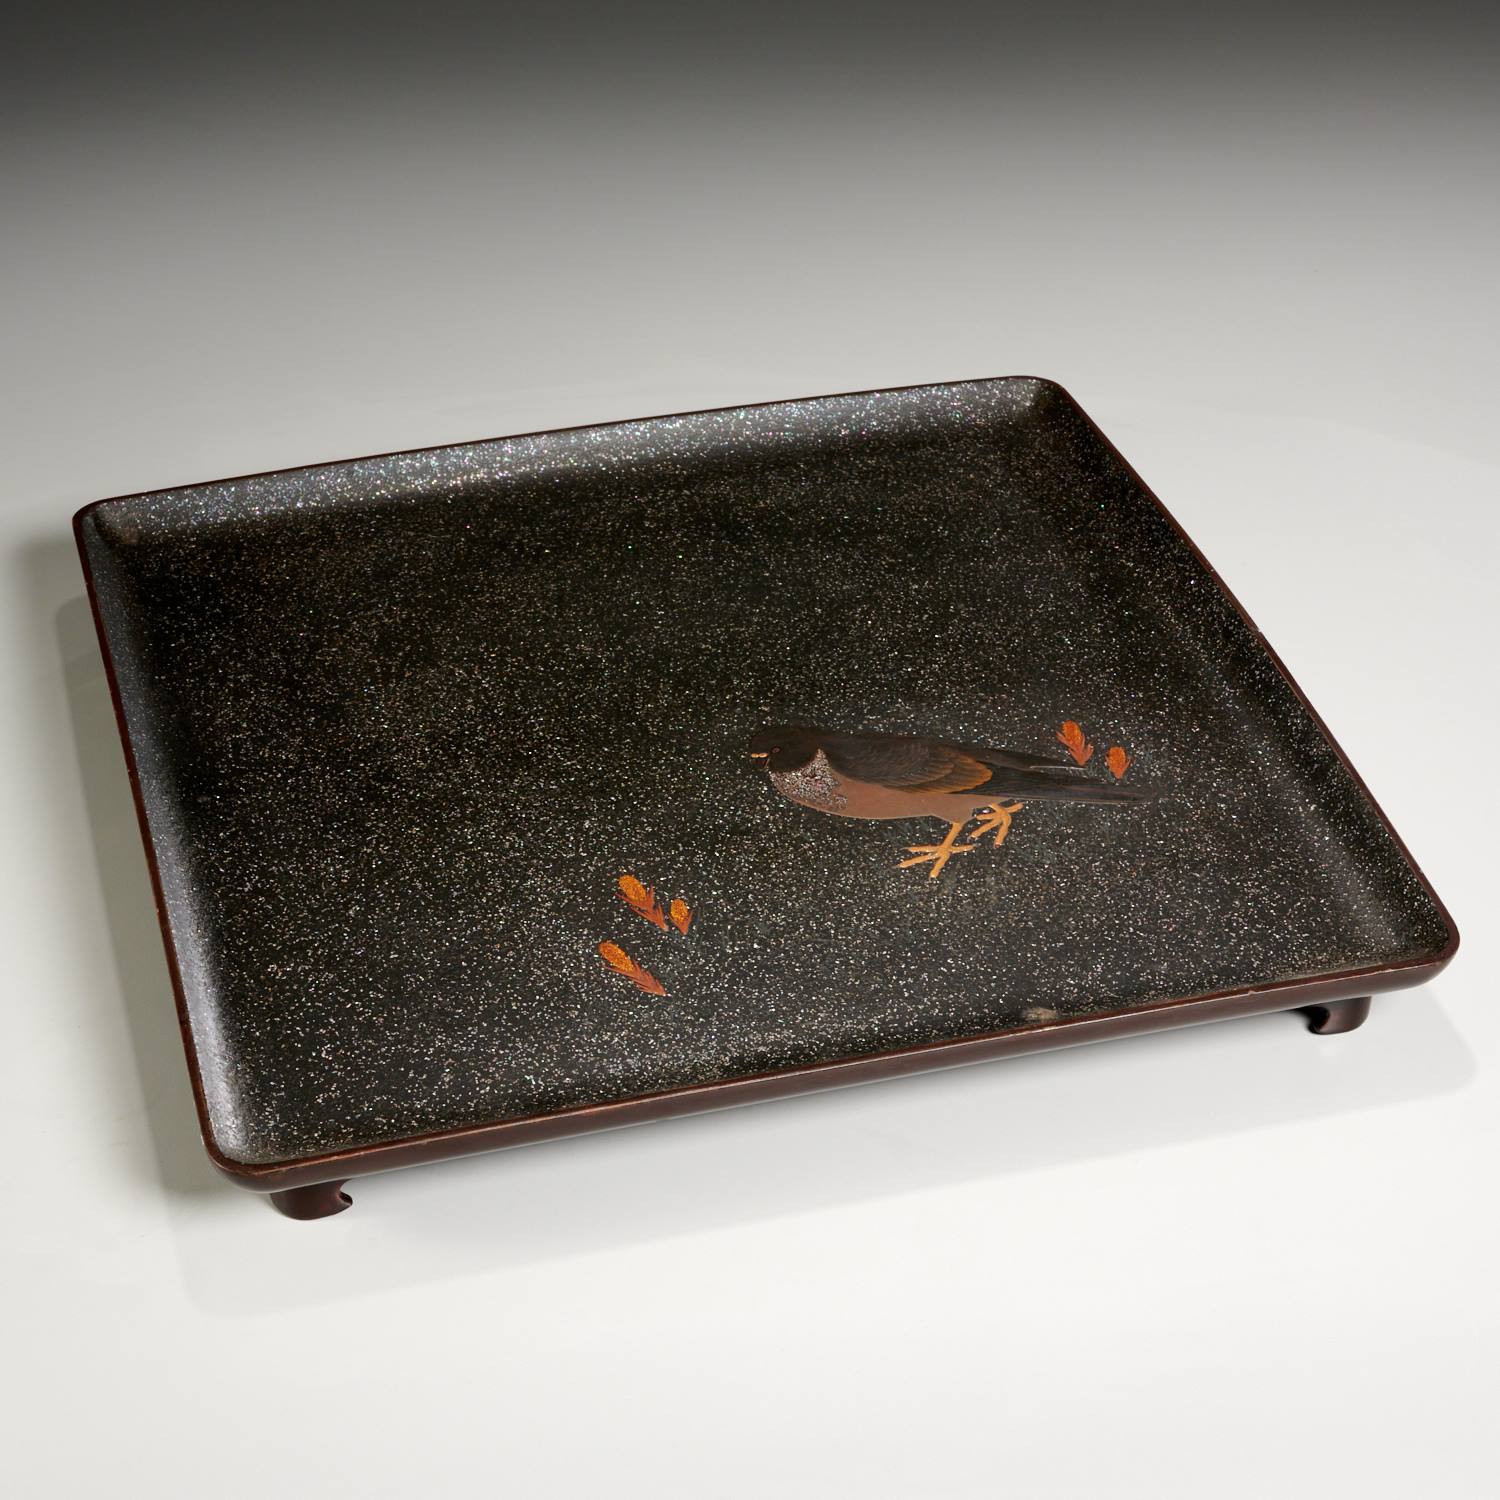 NICE JAPANESE LACQUERED TRAY Likely 2cdf22